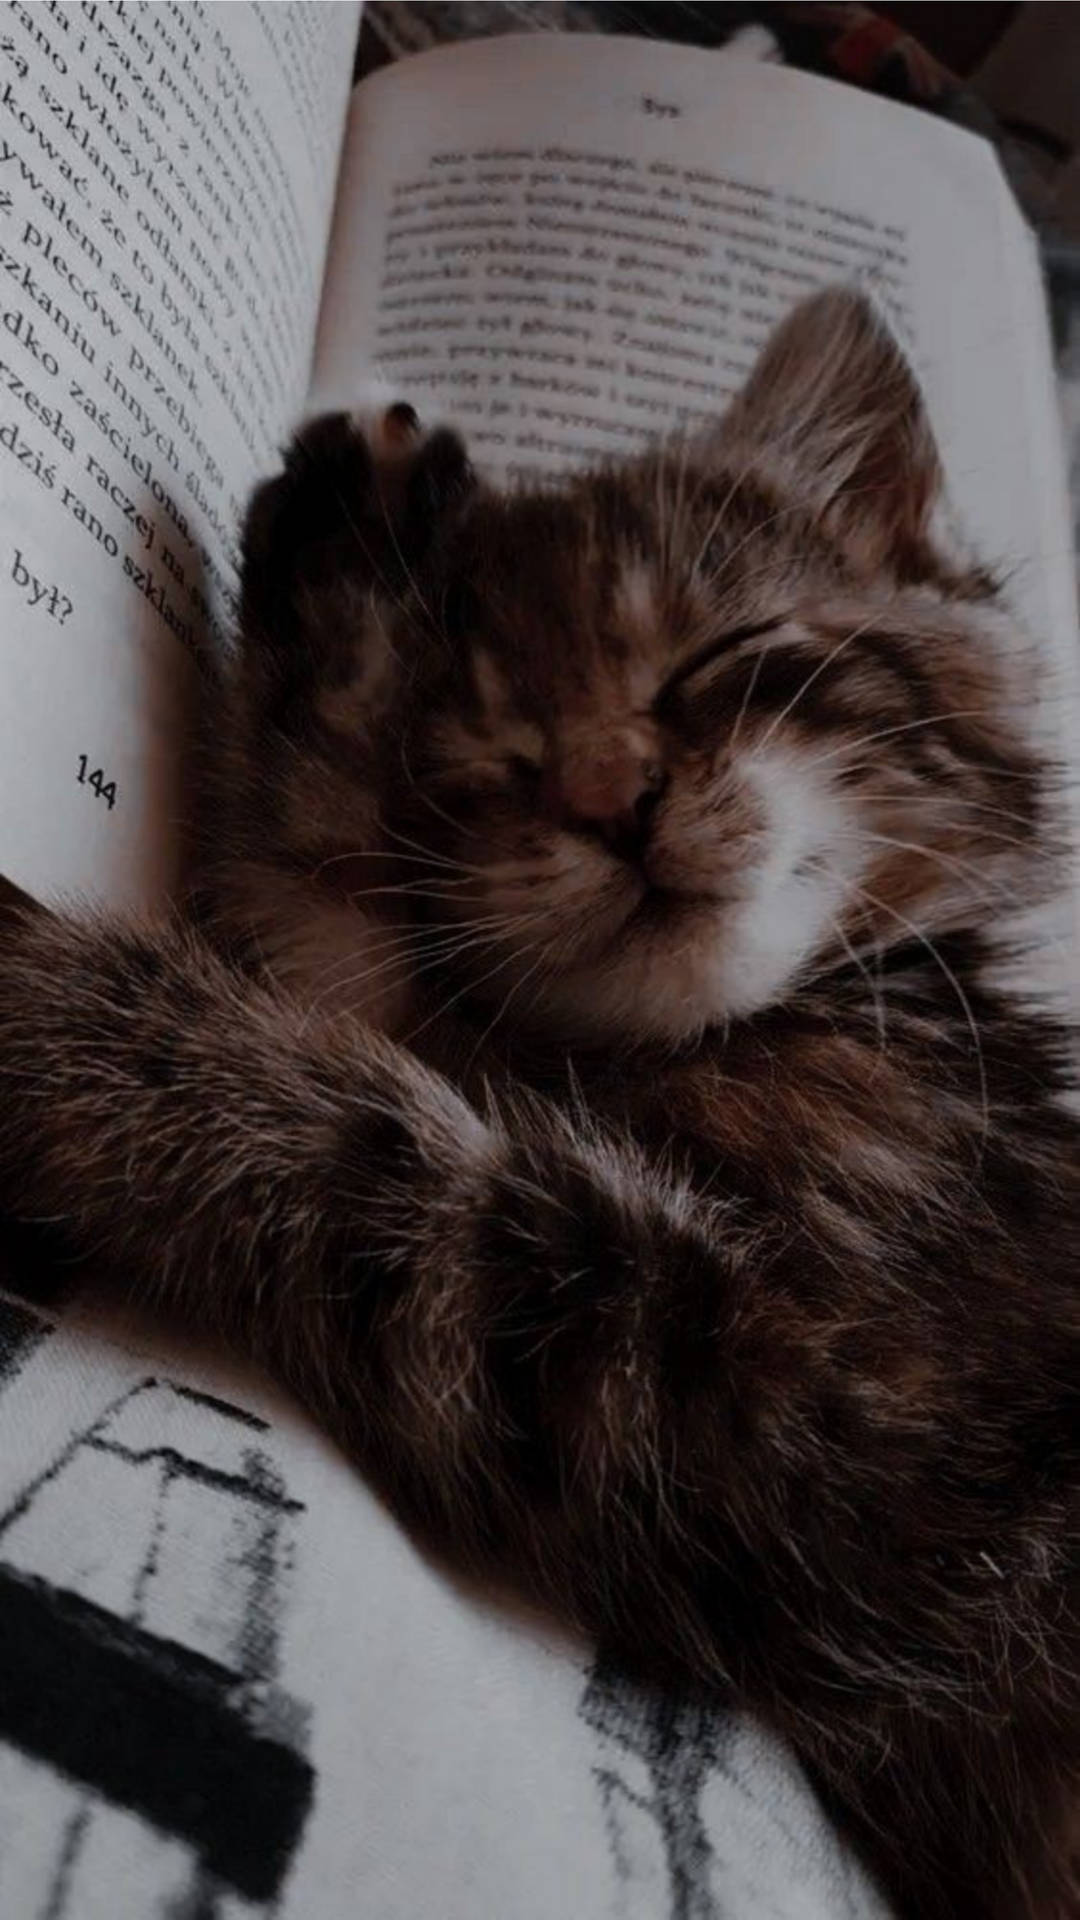 A Tranquil Moment - Cute Cat Aesthetically Sleeping On A Book Background